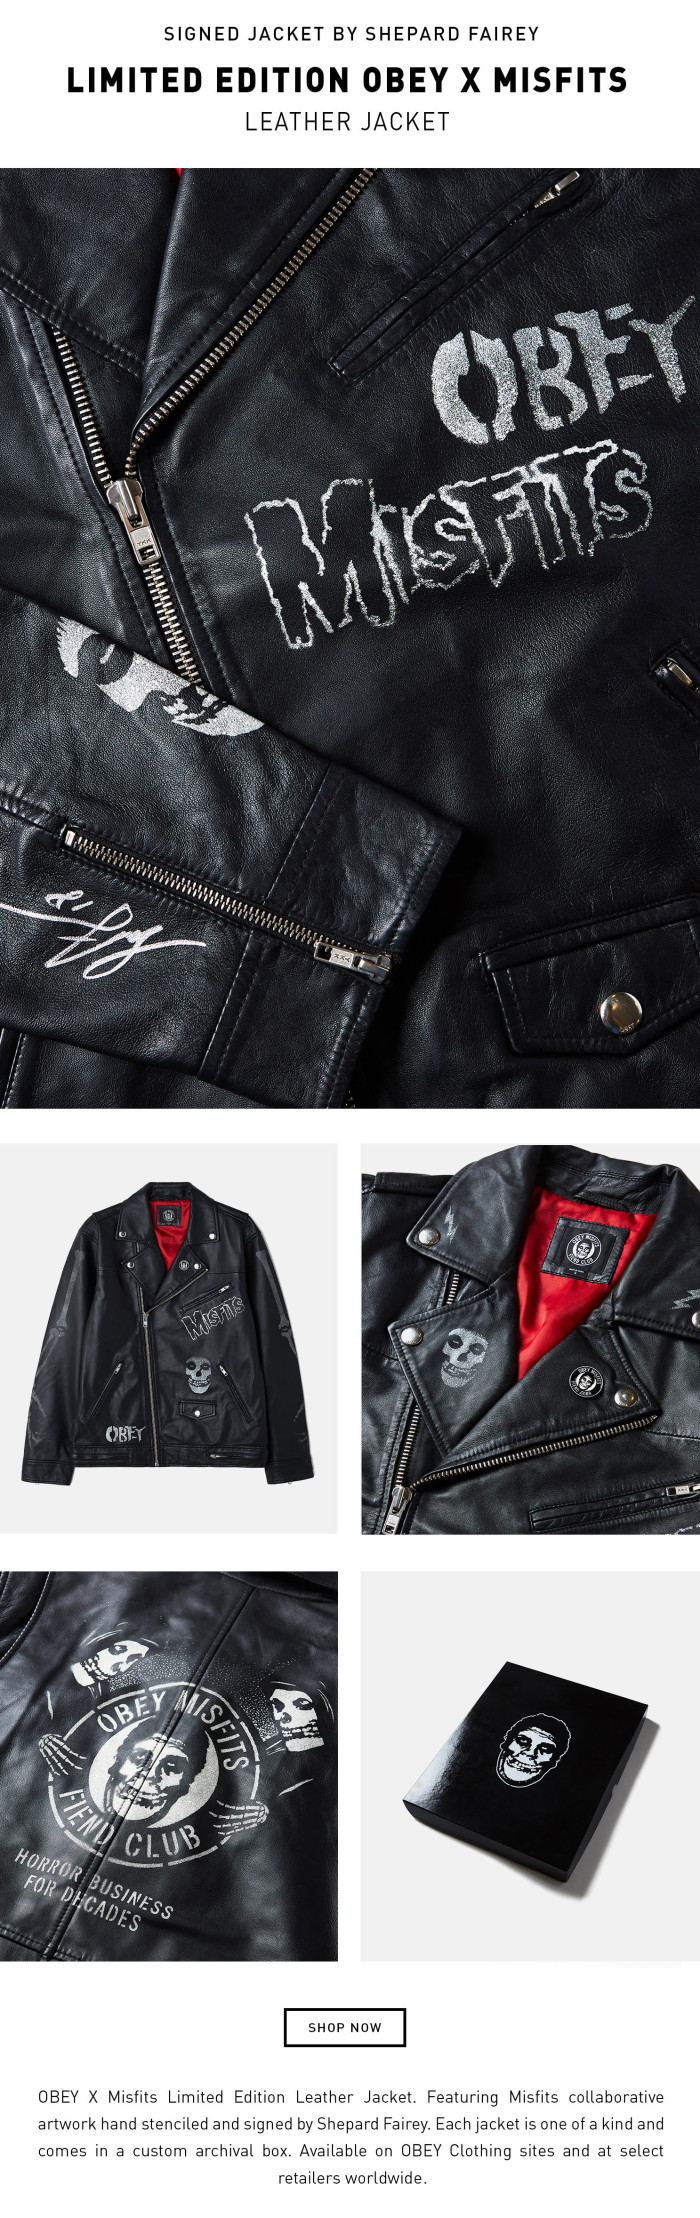 OBEY X MISFITS LIMITED EDITION LEATHER JACKET